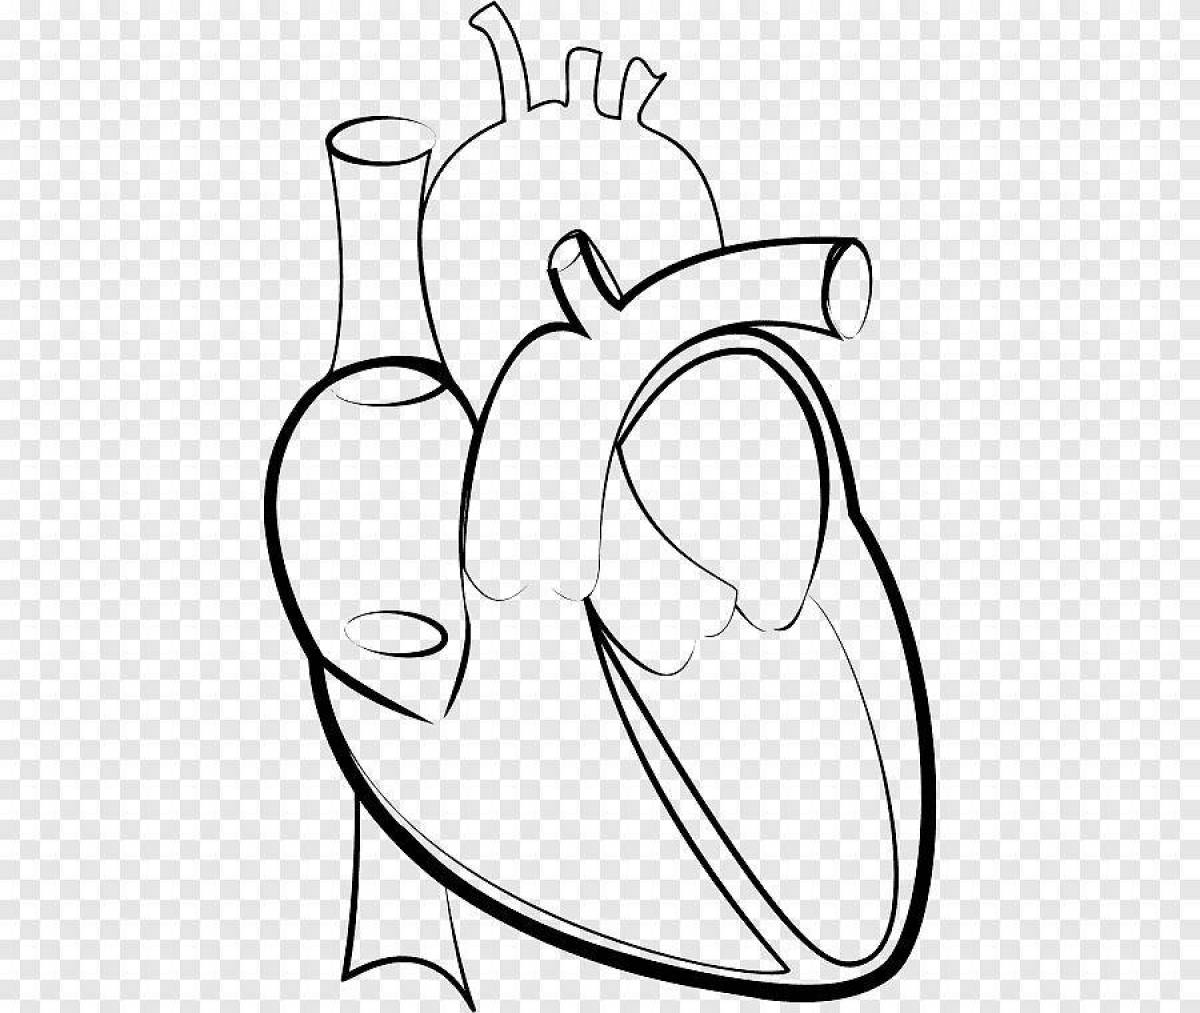 Coloring page calm human heart